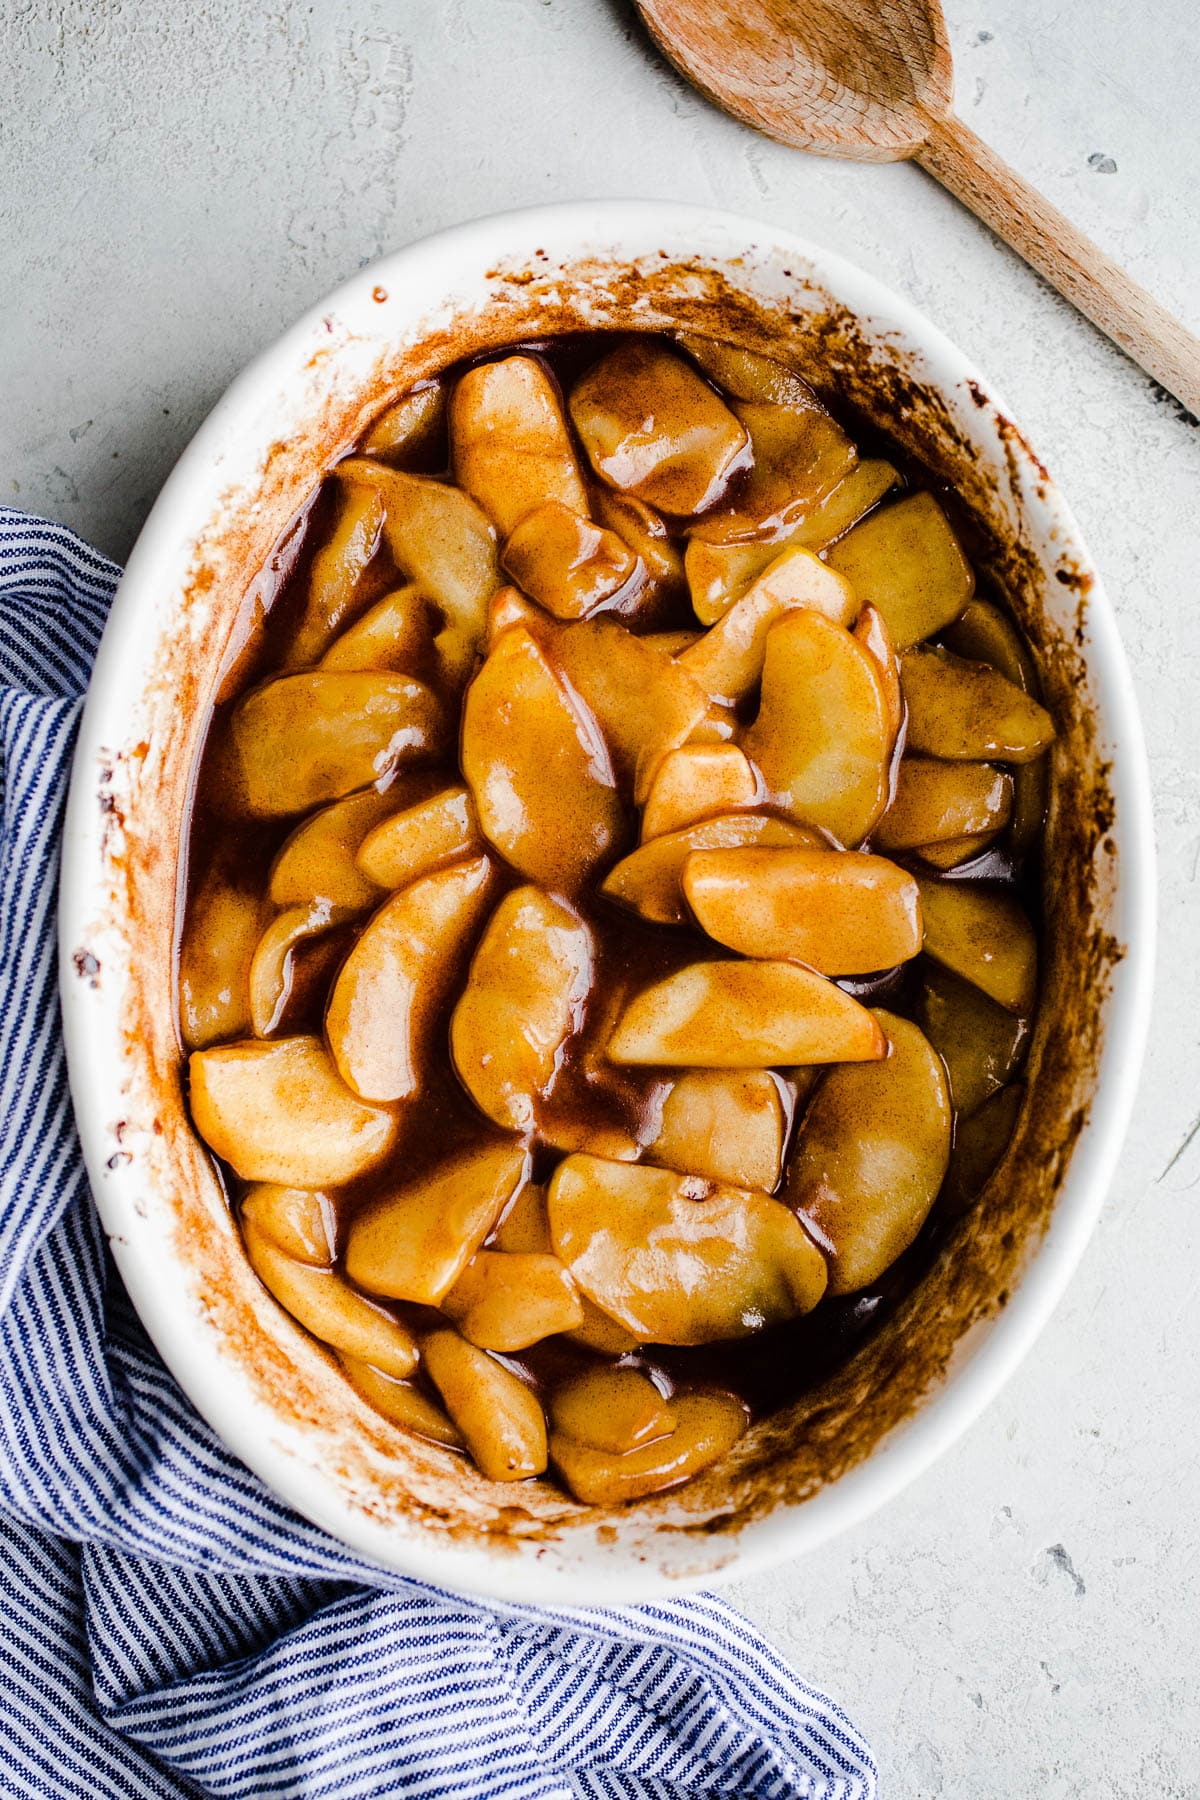 Baked cinnamon apples in a white baking dish next to a striped kitchen towel and wooden spoon.